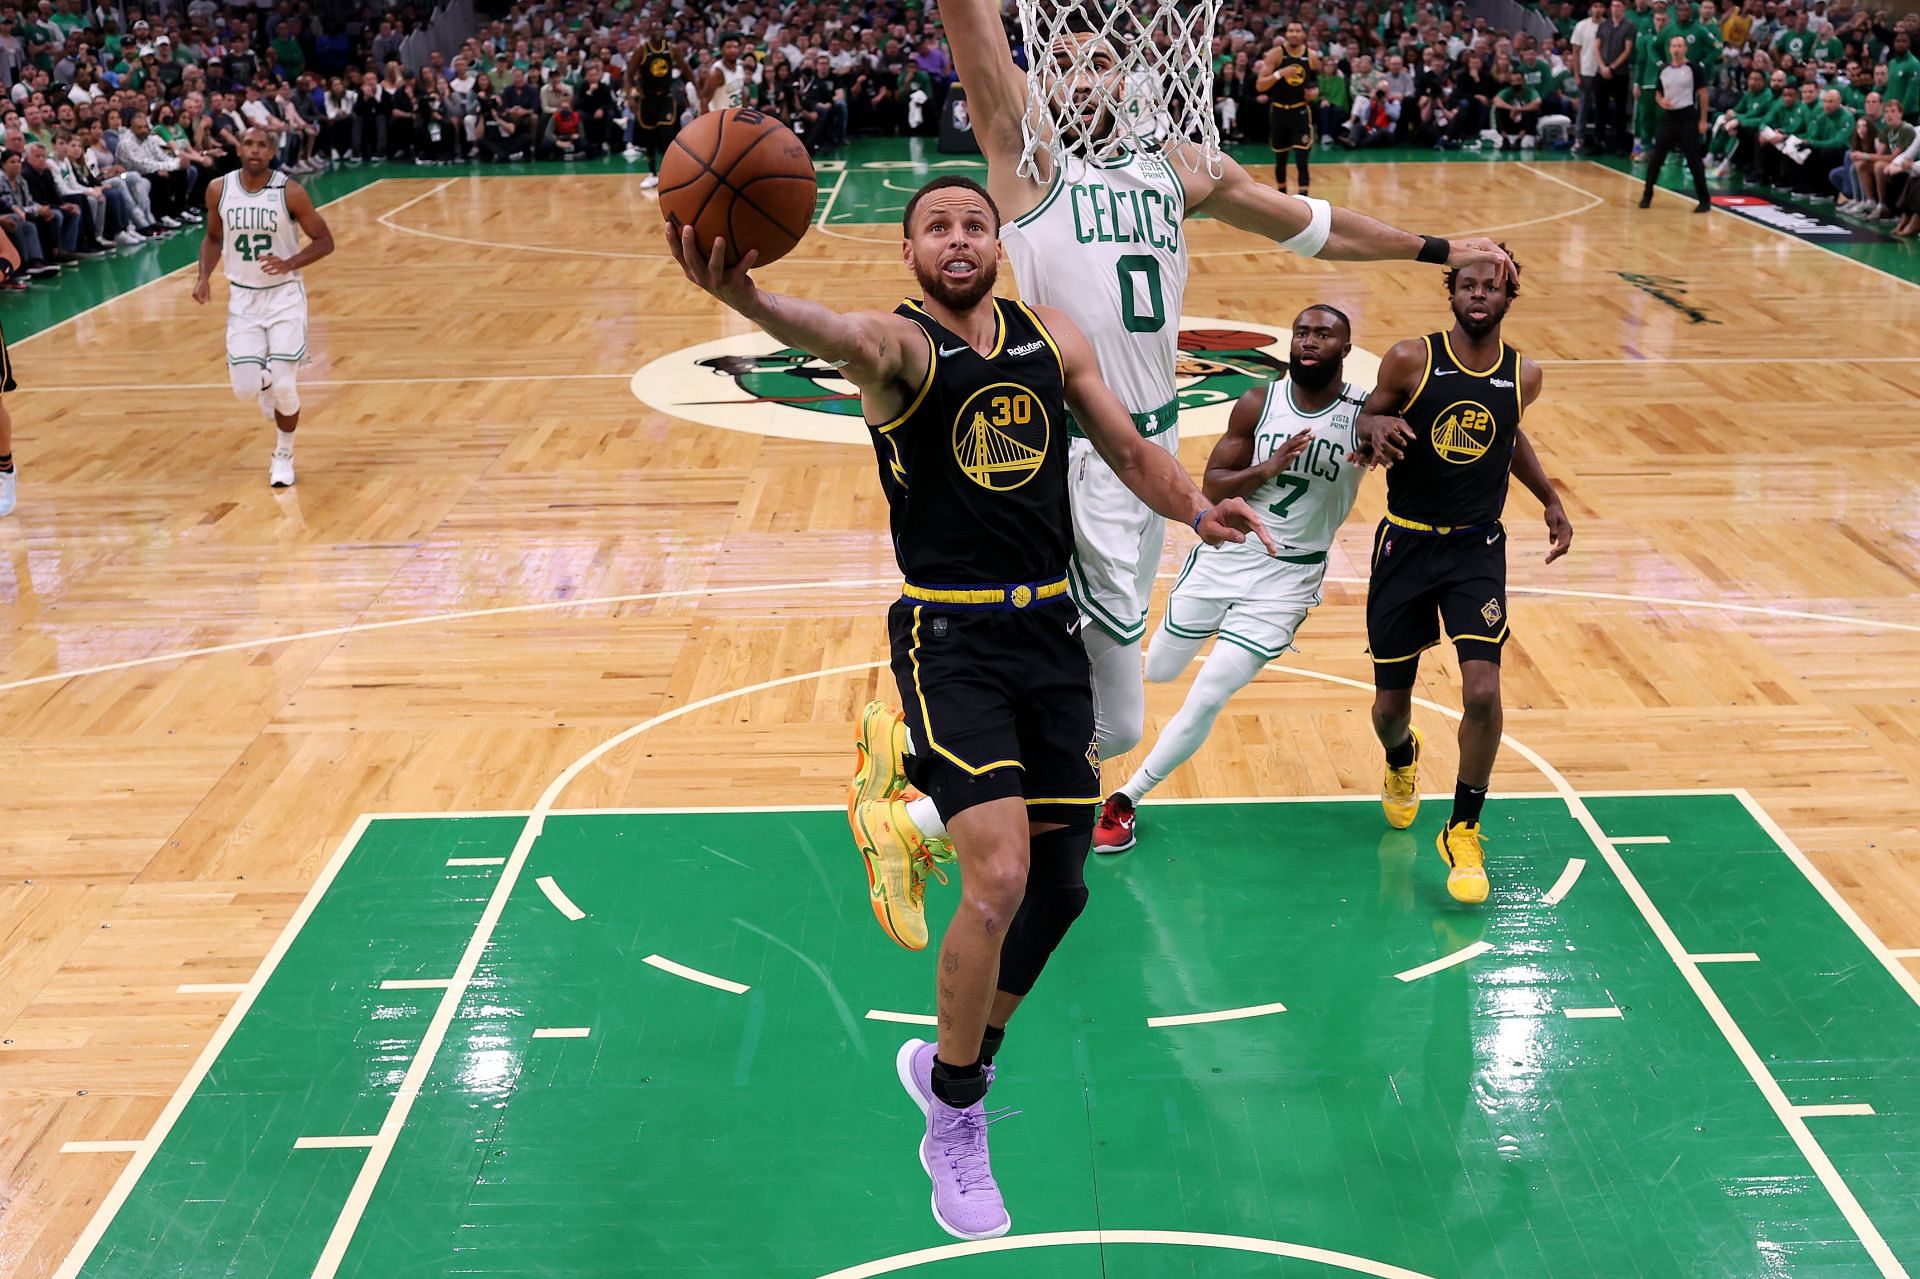 Game 5 of the Finals between the Golden State Warriors and Boston Celtics is Monday night.